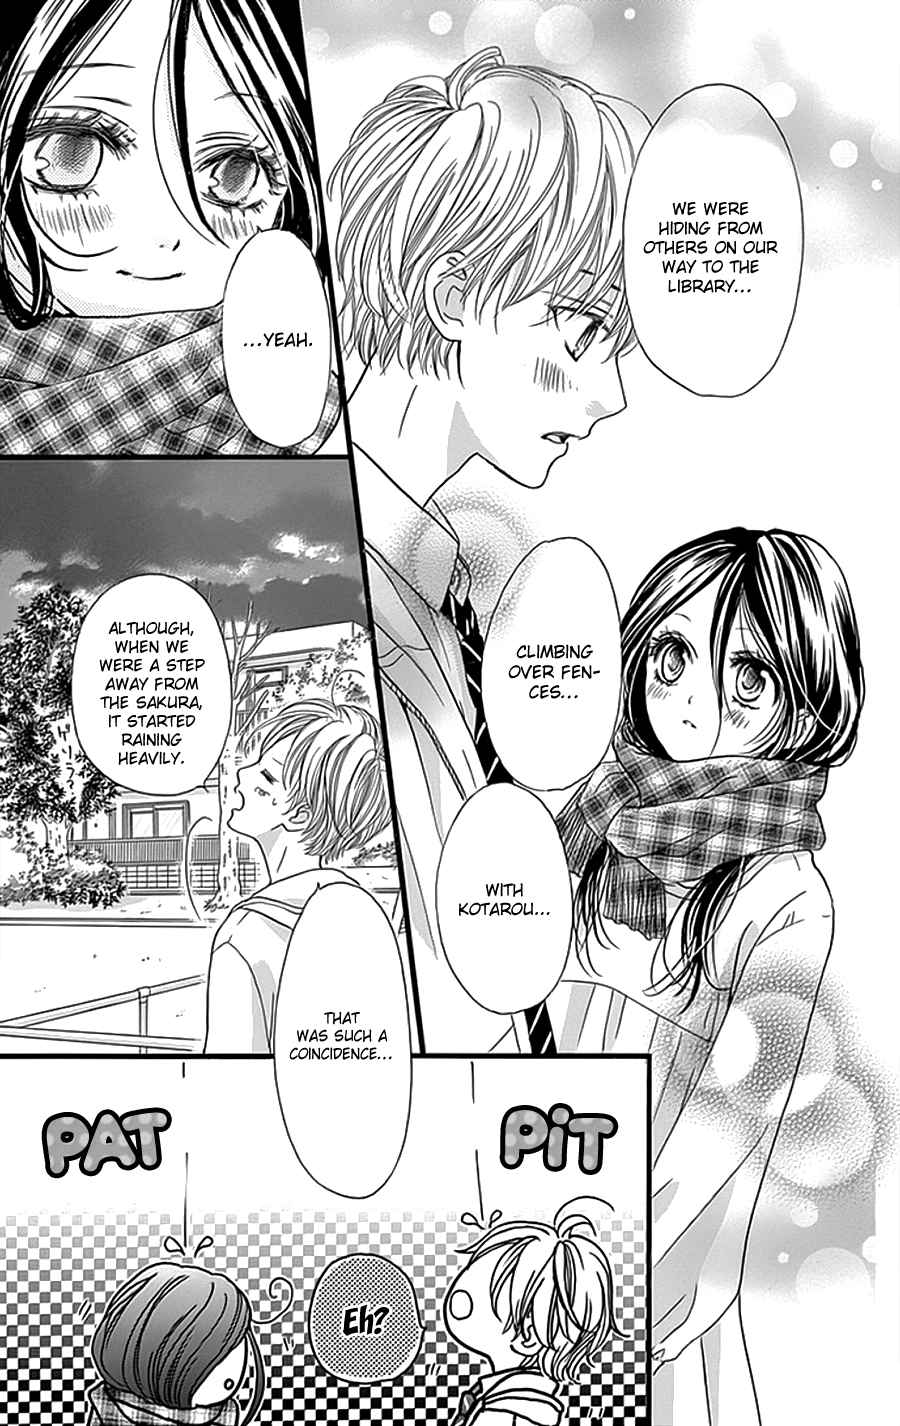 I Love You Baby Vol. 3 Ch. 19